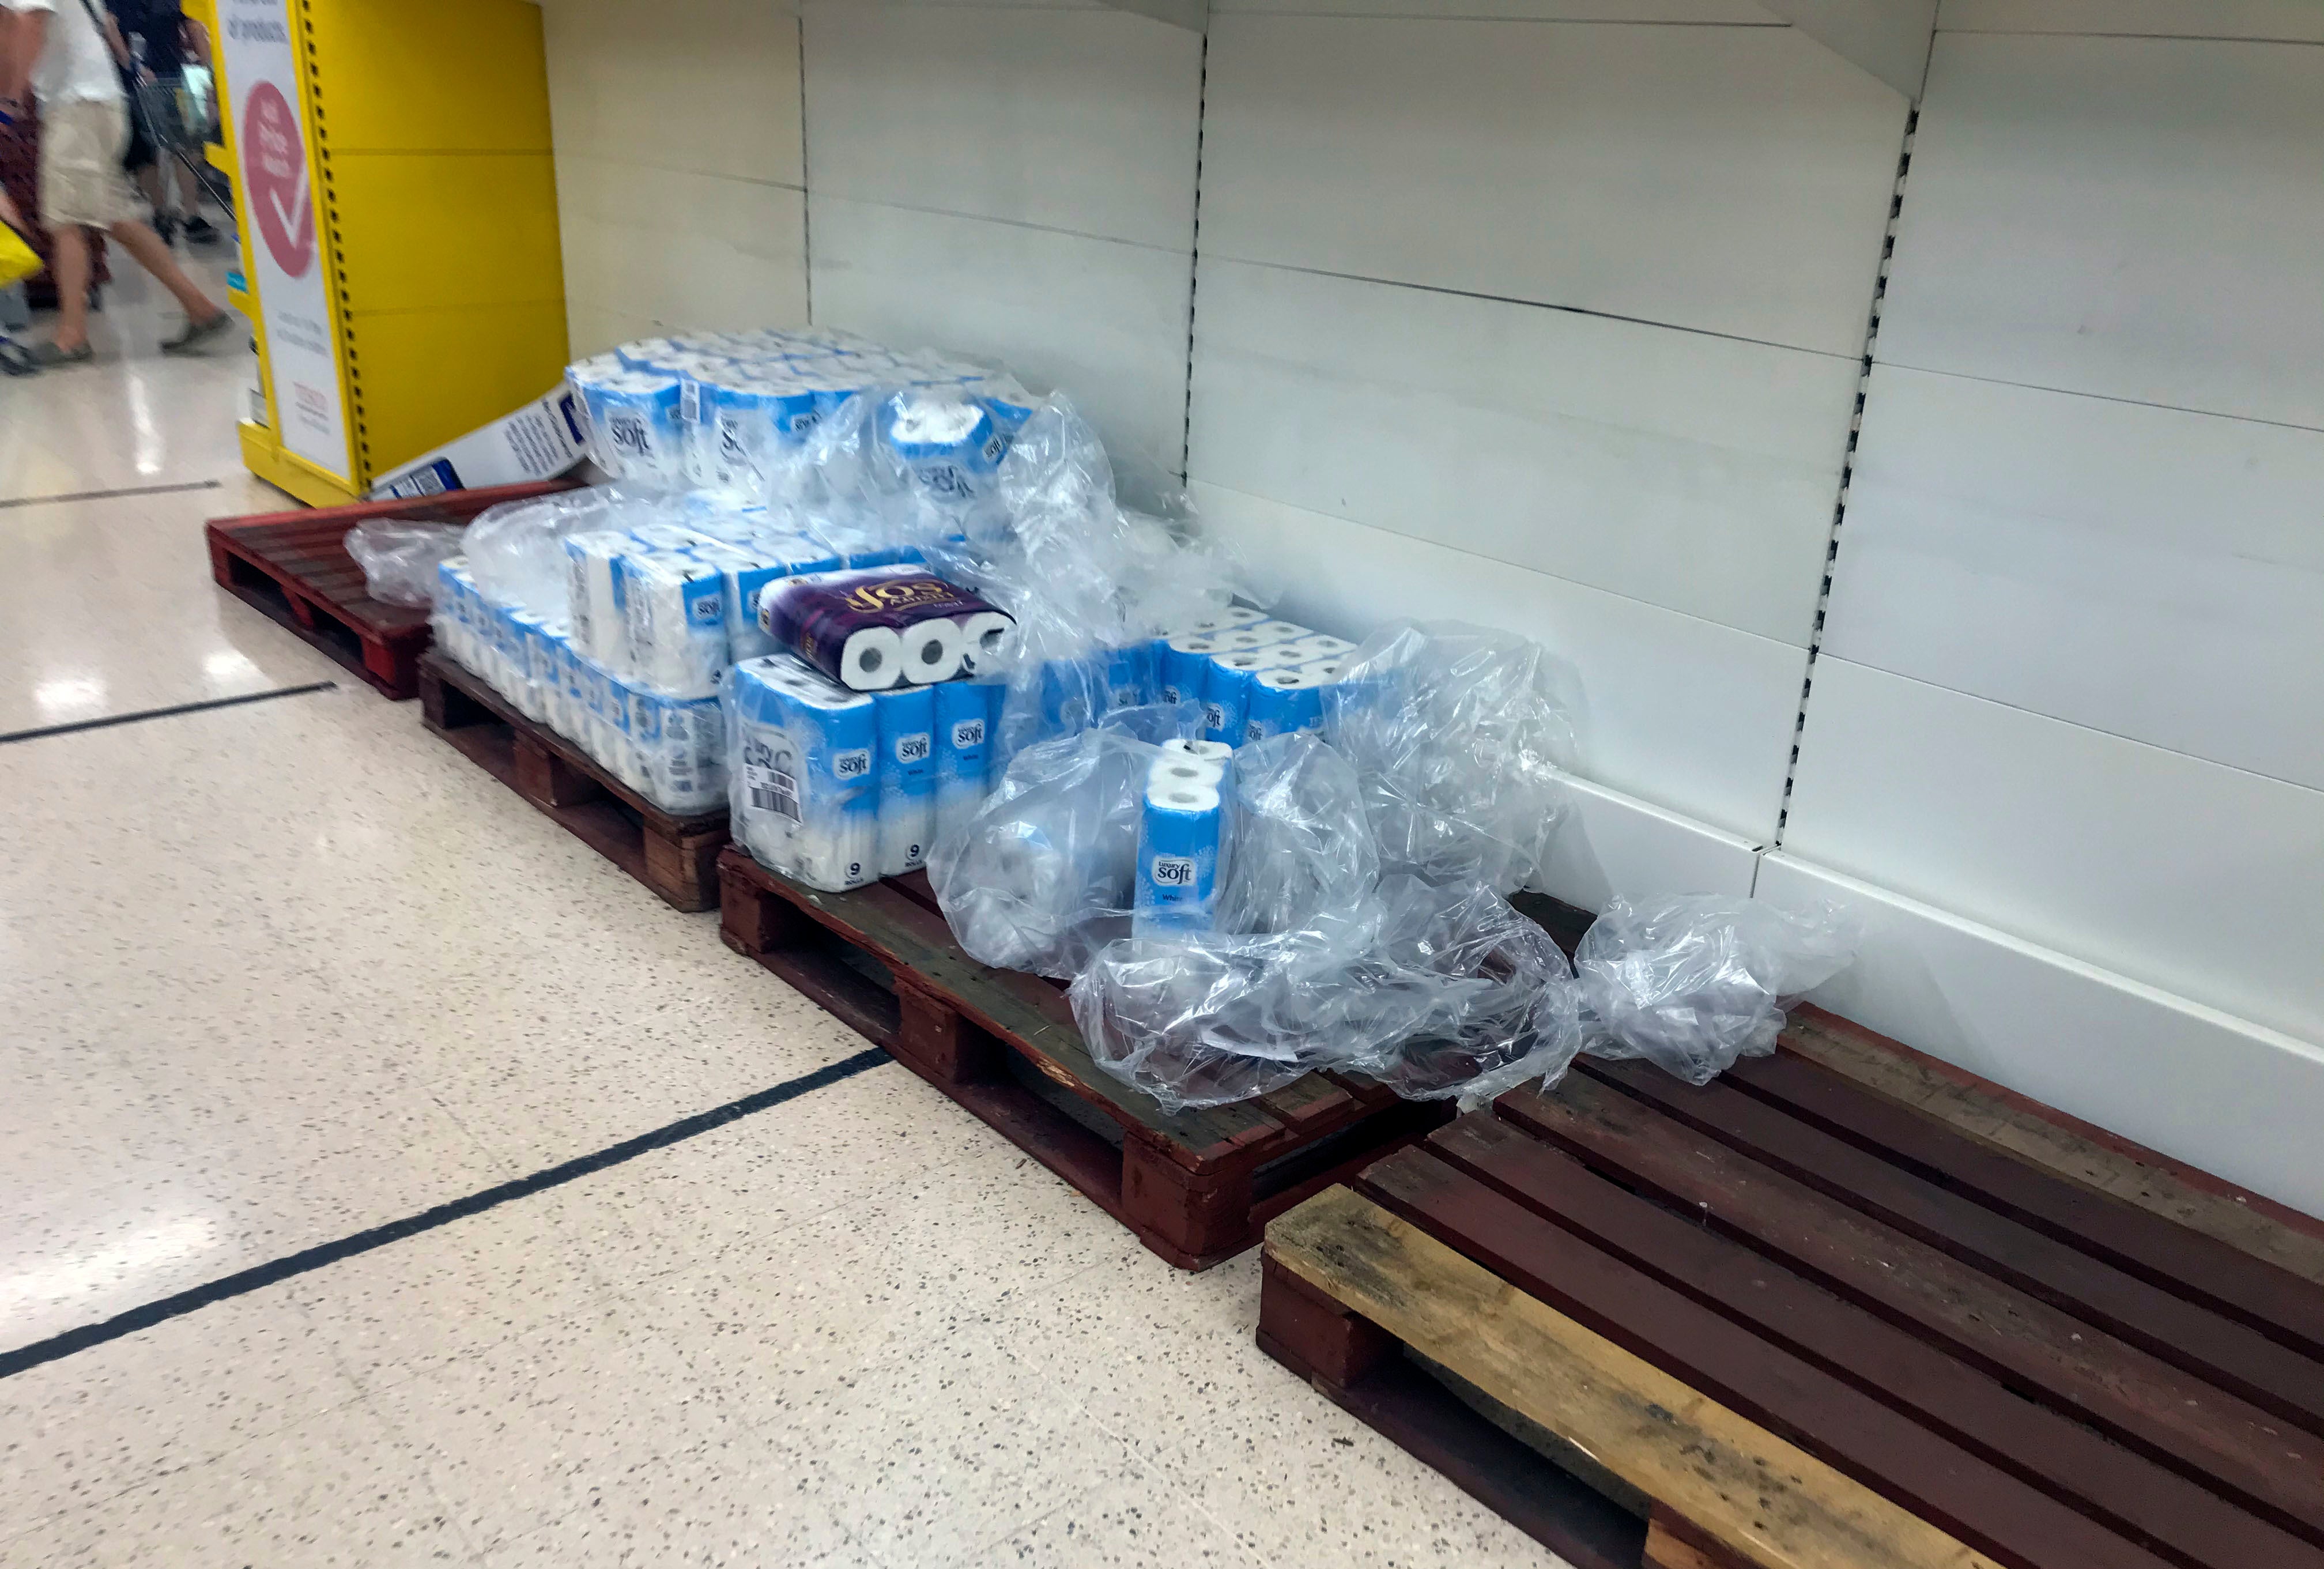 Depleted stocks and empty pallets in the toilet roll aisle at the Portsmouth North Harbour Tesco